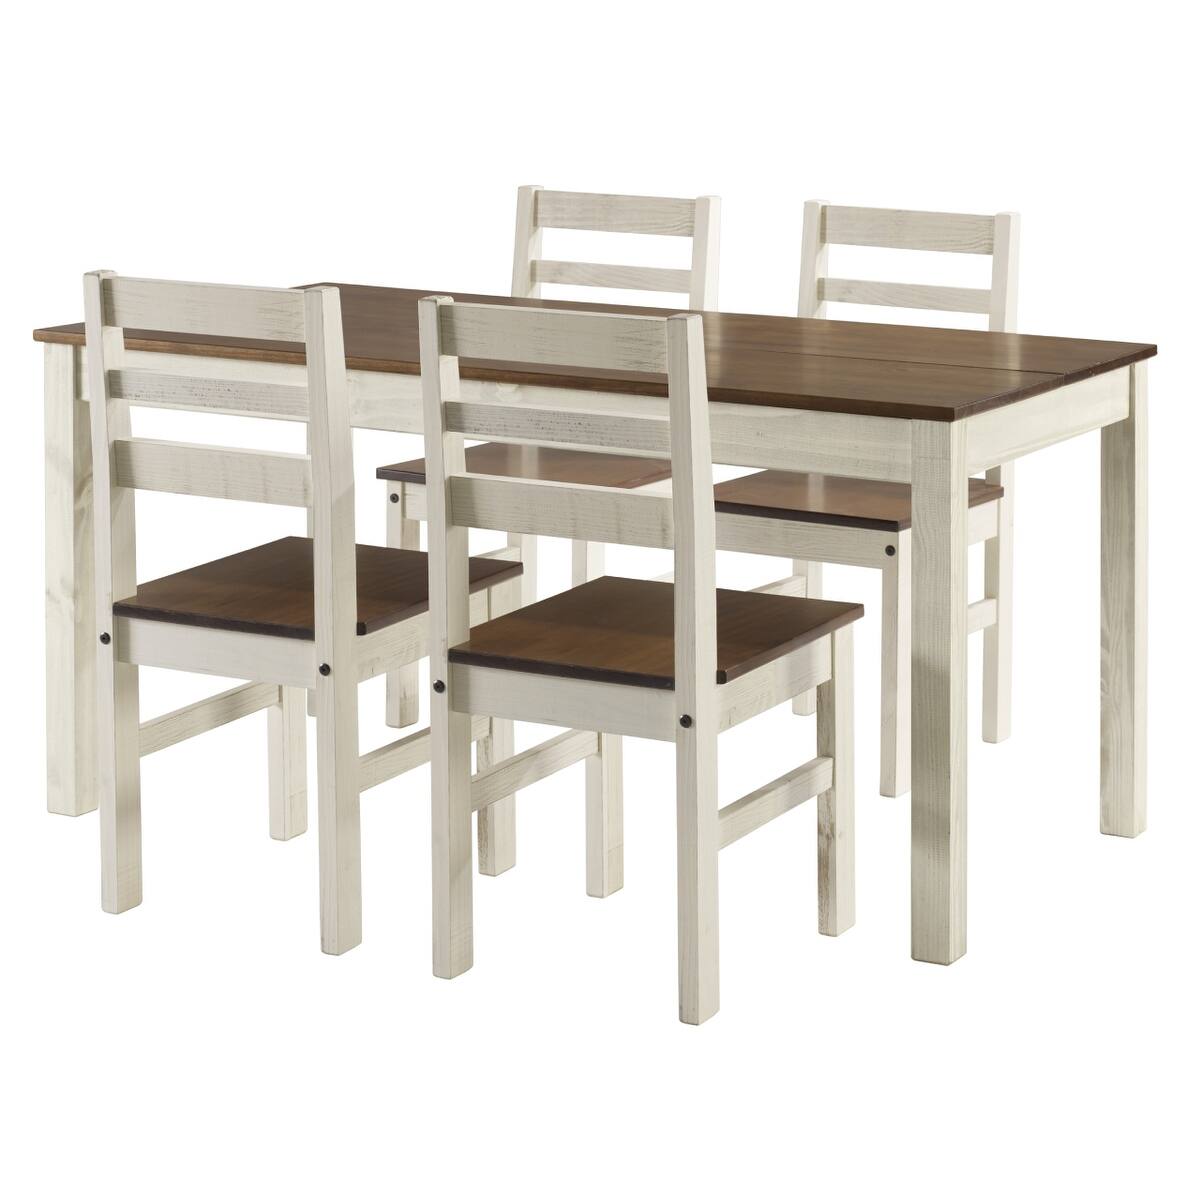 OS Home and Office Furniture Model CADBTB6 Cottage Series Dining Table in Distressed White(Chairs Sold Separately) - White